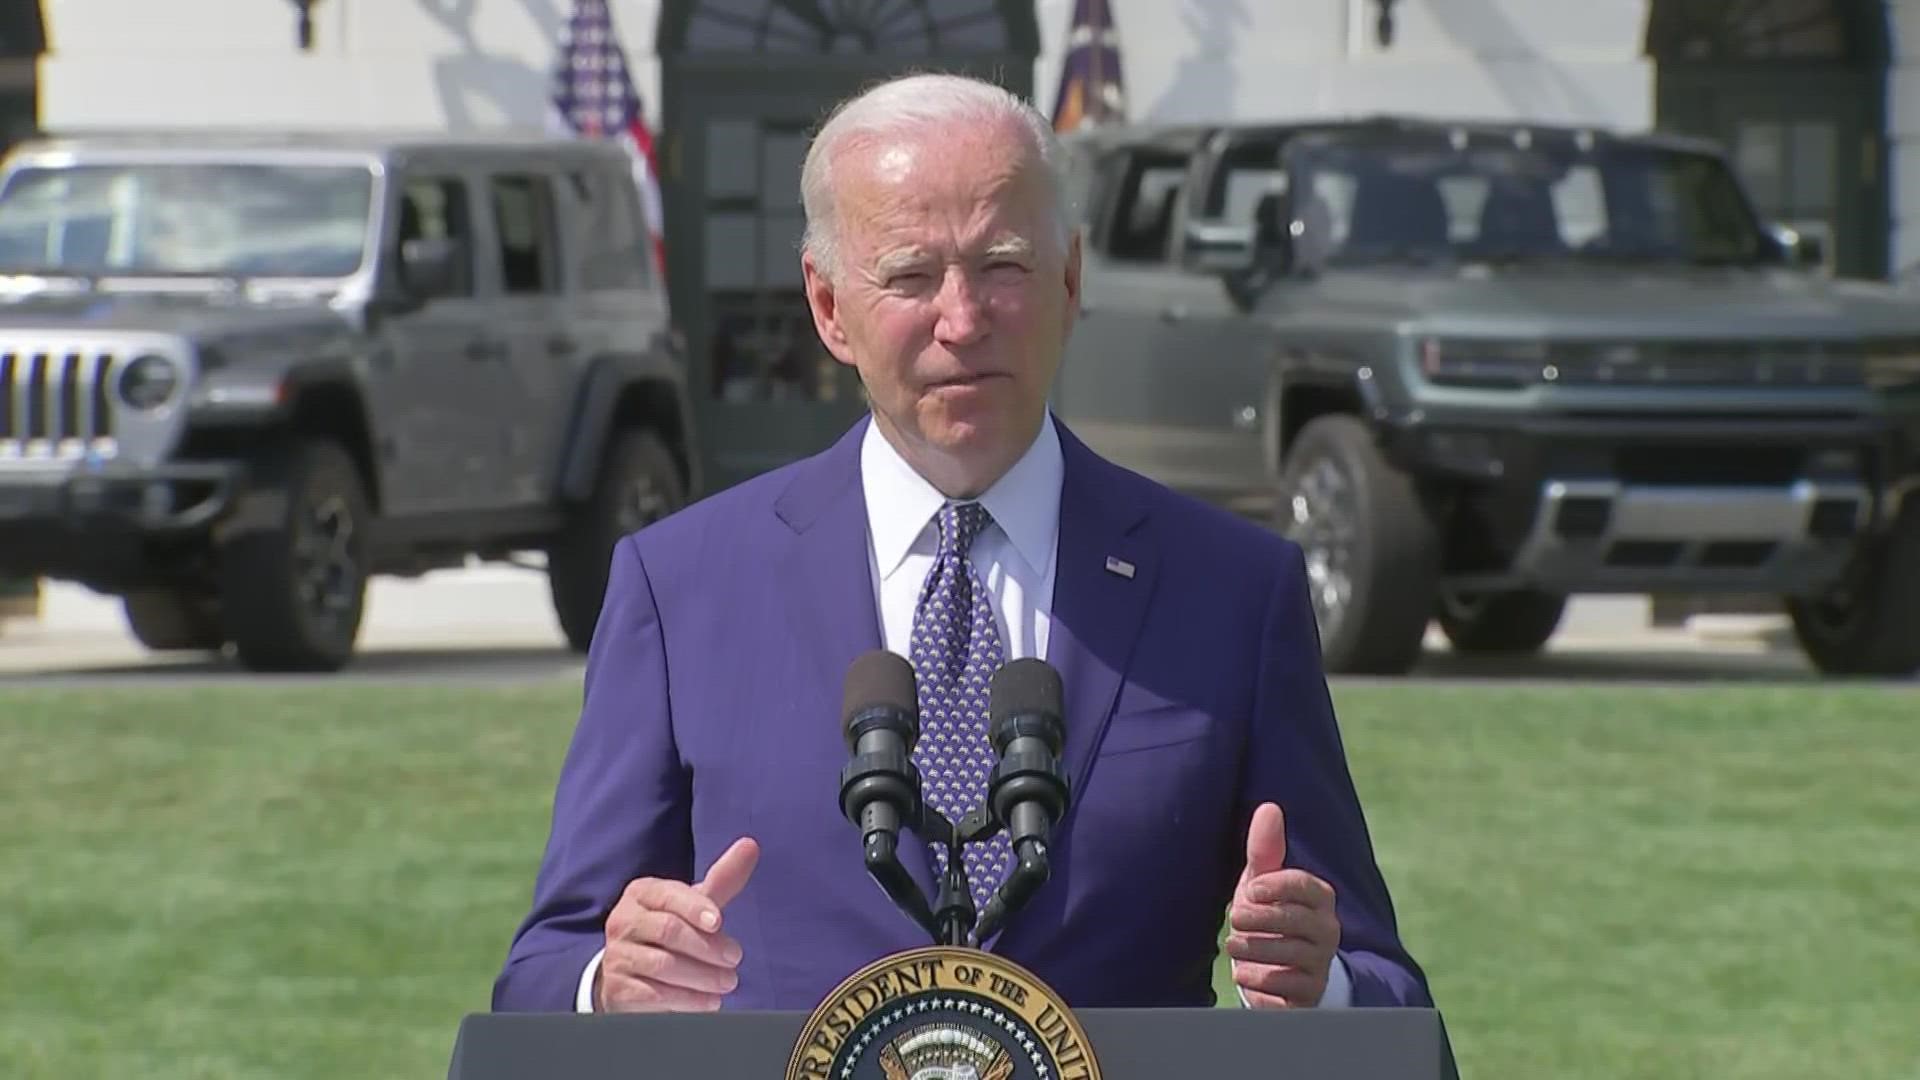 The Biden administration wants automakers to raise gas mileage and cut tailpipe pollution between now and model year 2026.